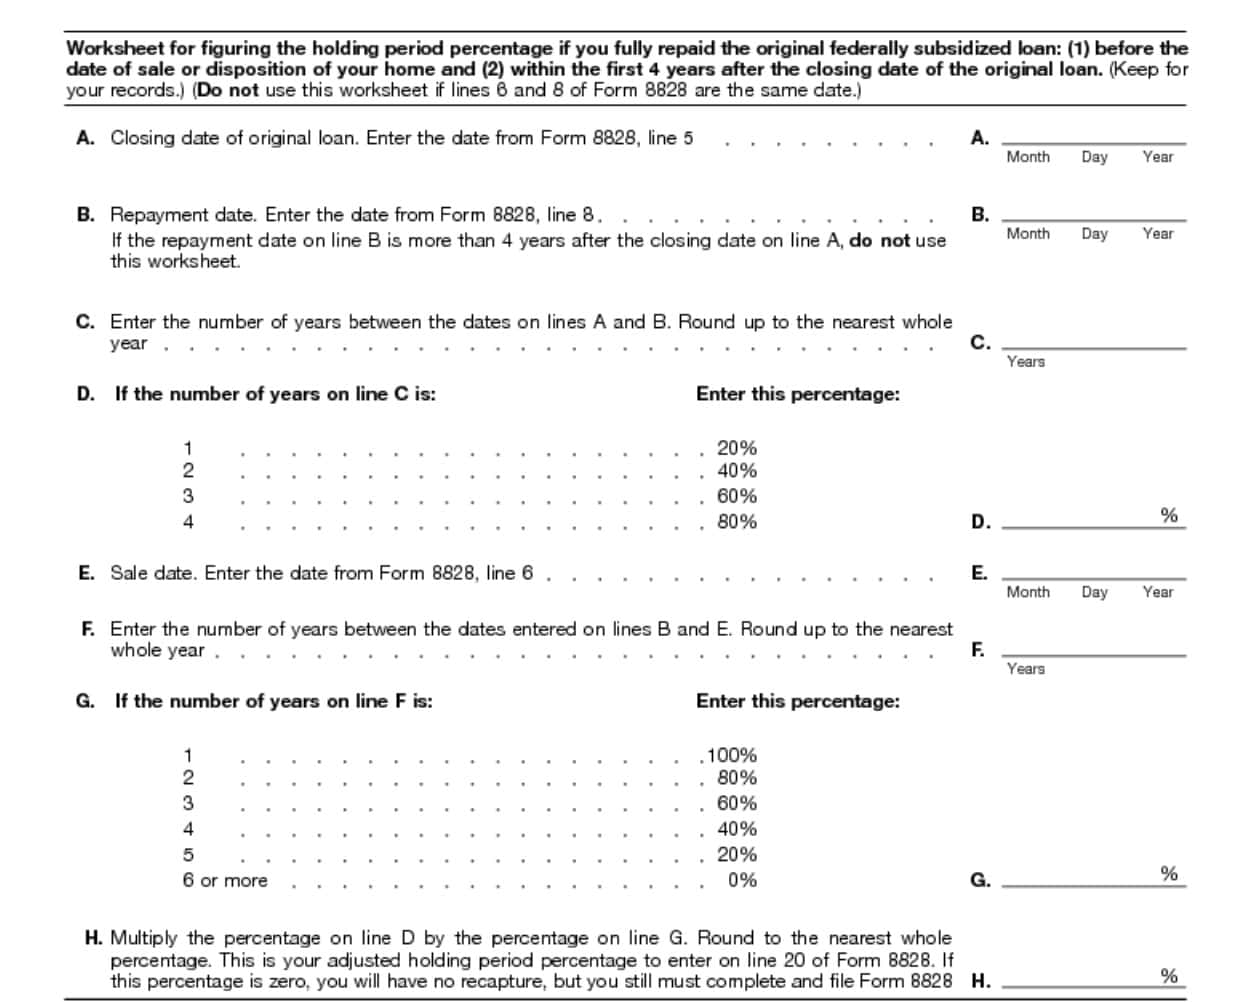 worksheet for figuring the holding period percentage if you fully repaid the original federally subsidized loan within 4 years and before disposition